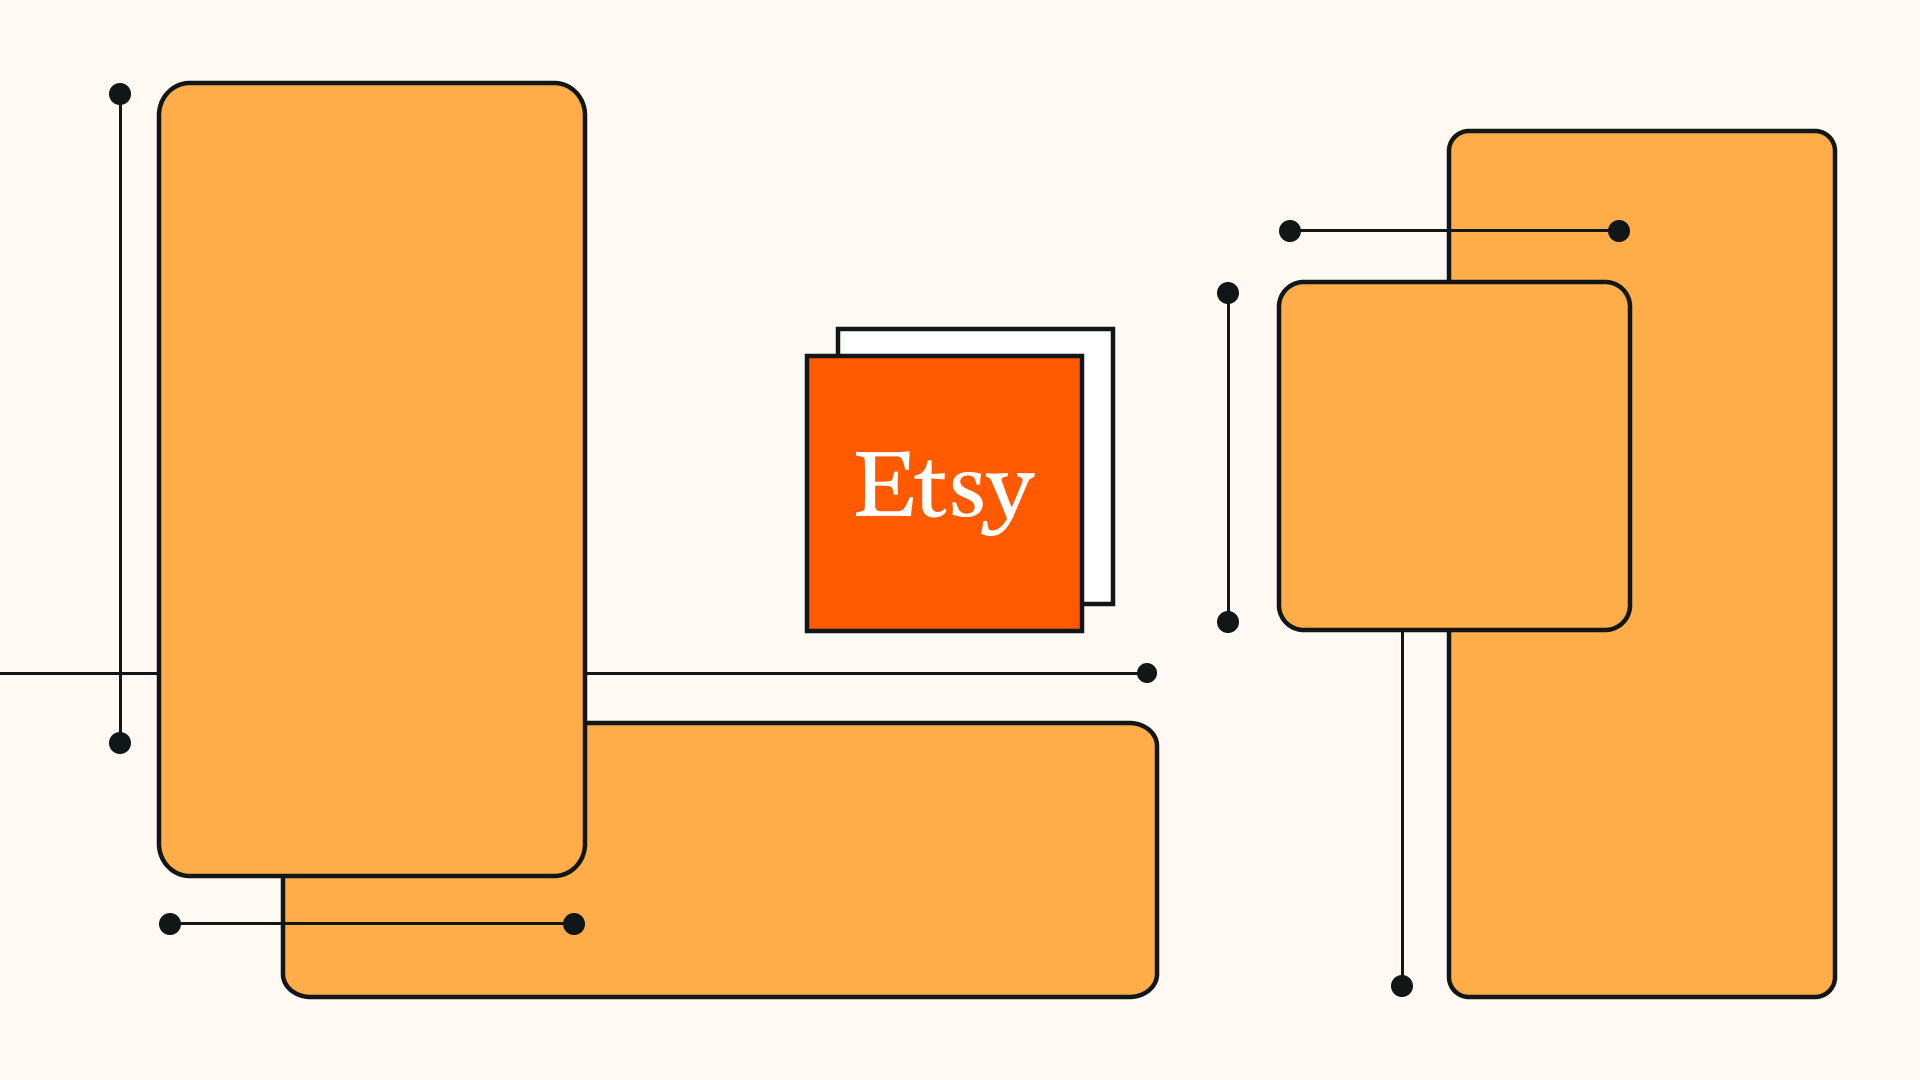 Etsy size guide: How to create Etsy banners and covers